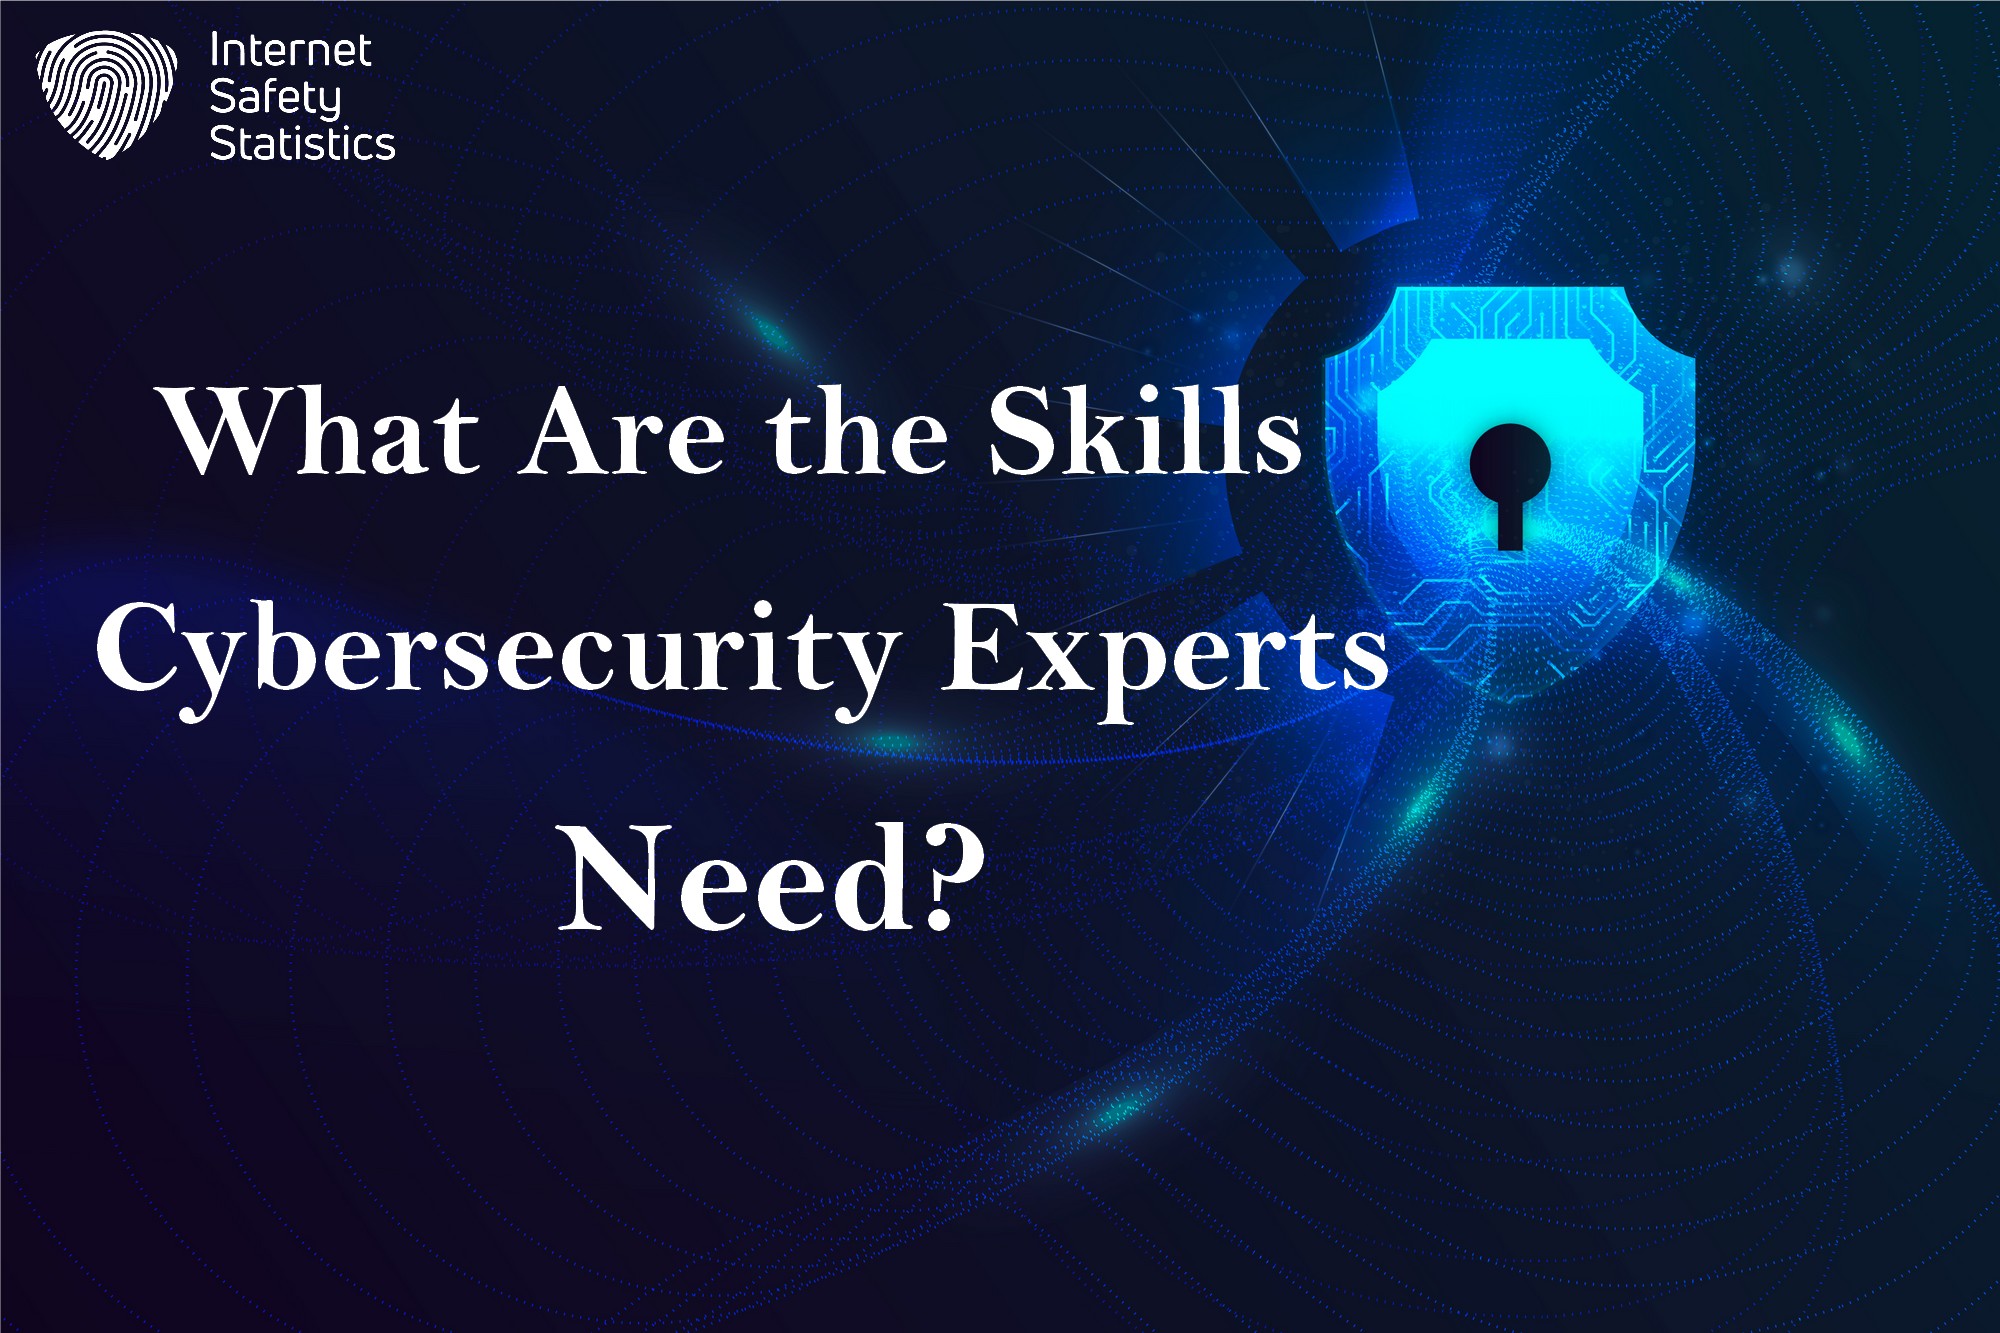 How to Become a Cybersecurity Expert? What Are the Skills Cybersecurity Experts Need?